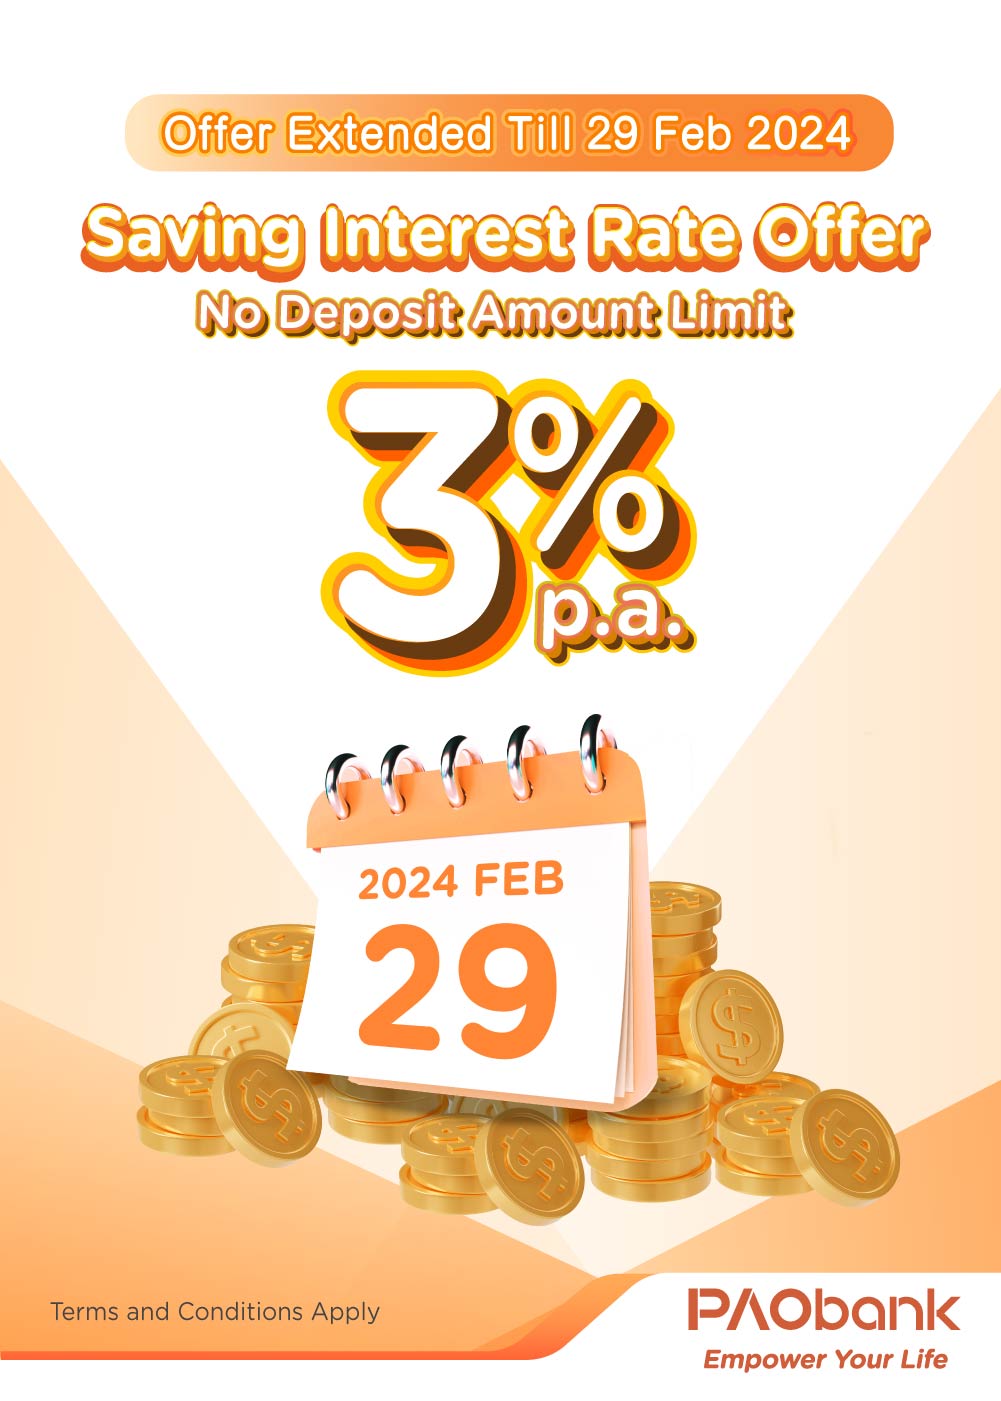 PAOB - Saving Interest Rate Offer Offer Extended